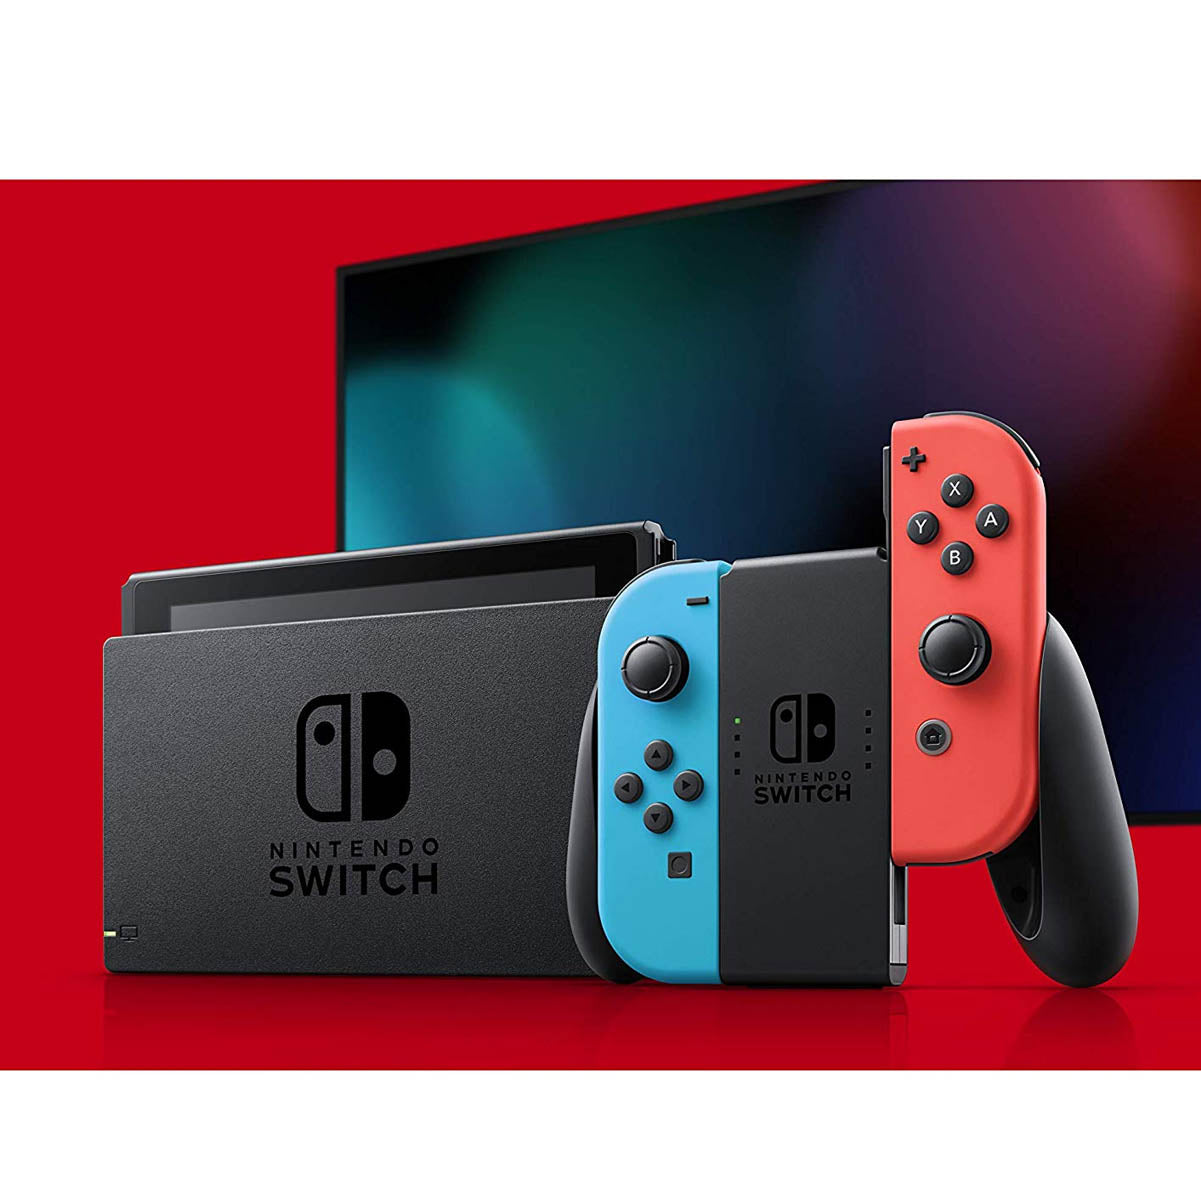 Nintendo Switch Gaming Console with Extended Battery - Neon Blue/Red Joy-Con